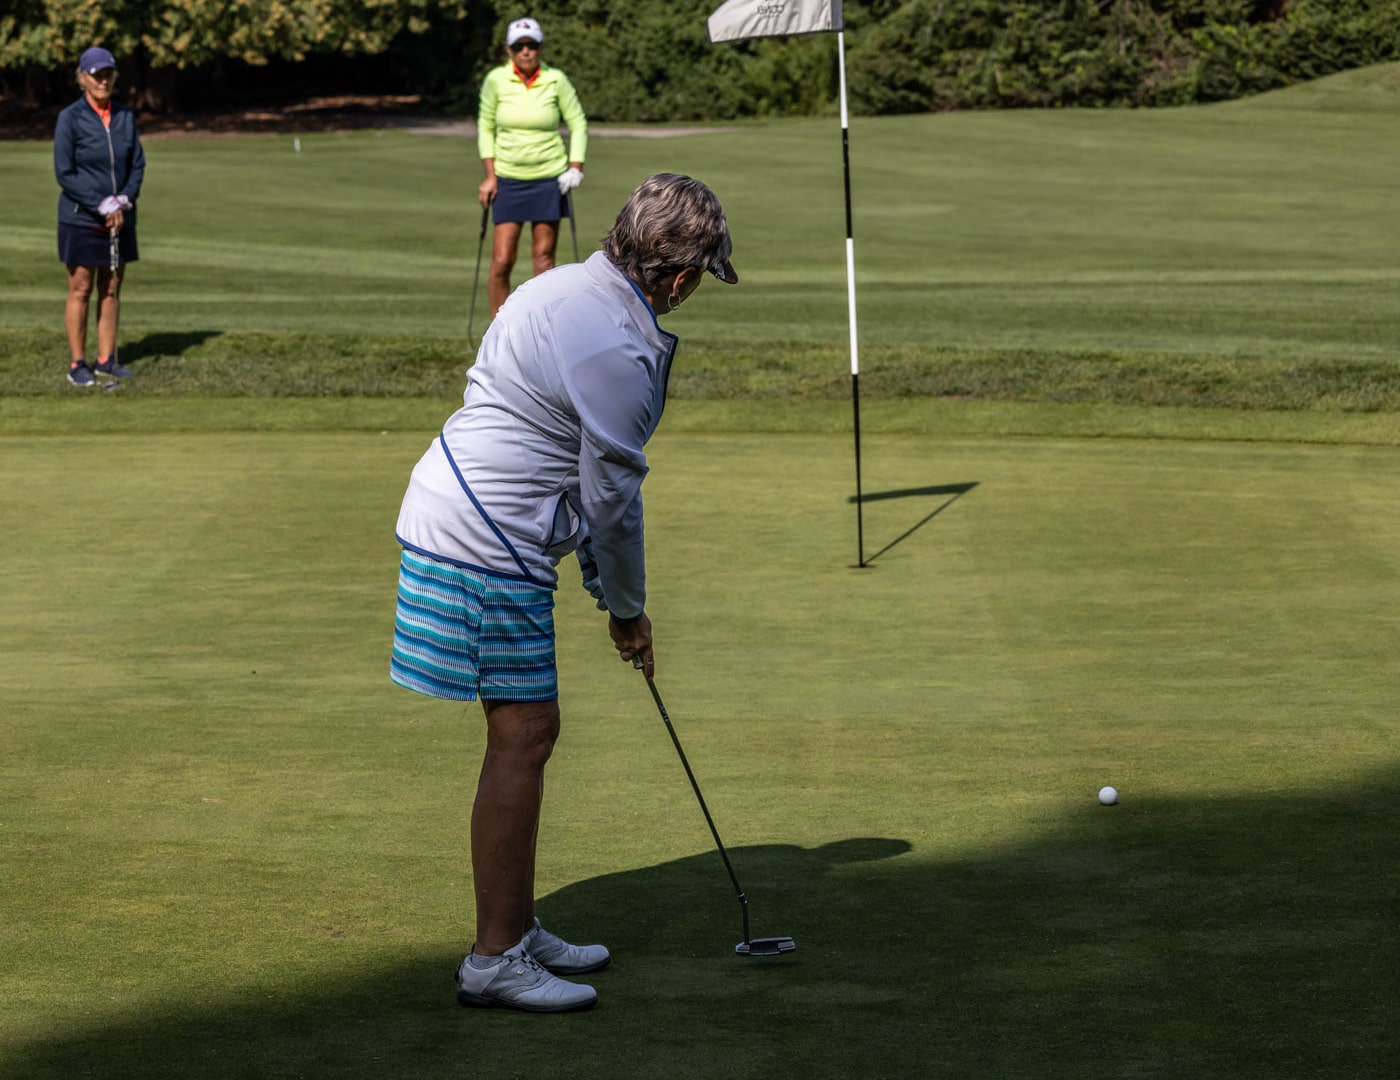 Country-Club-Of-New-Bedford FB-2023-Womens-FB-Gallery August-2023-Country-Club-Of-New-Bedford-FB-2023-Womens-FB-Gallery August-2023-Womens-FB-Gallery-Tuesday-Photos-Image-7